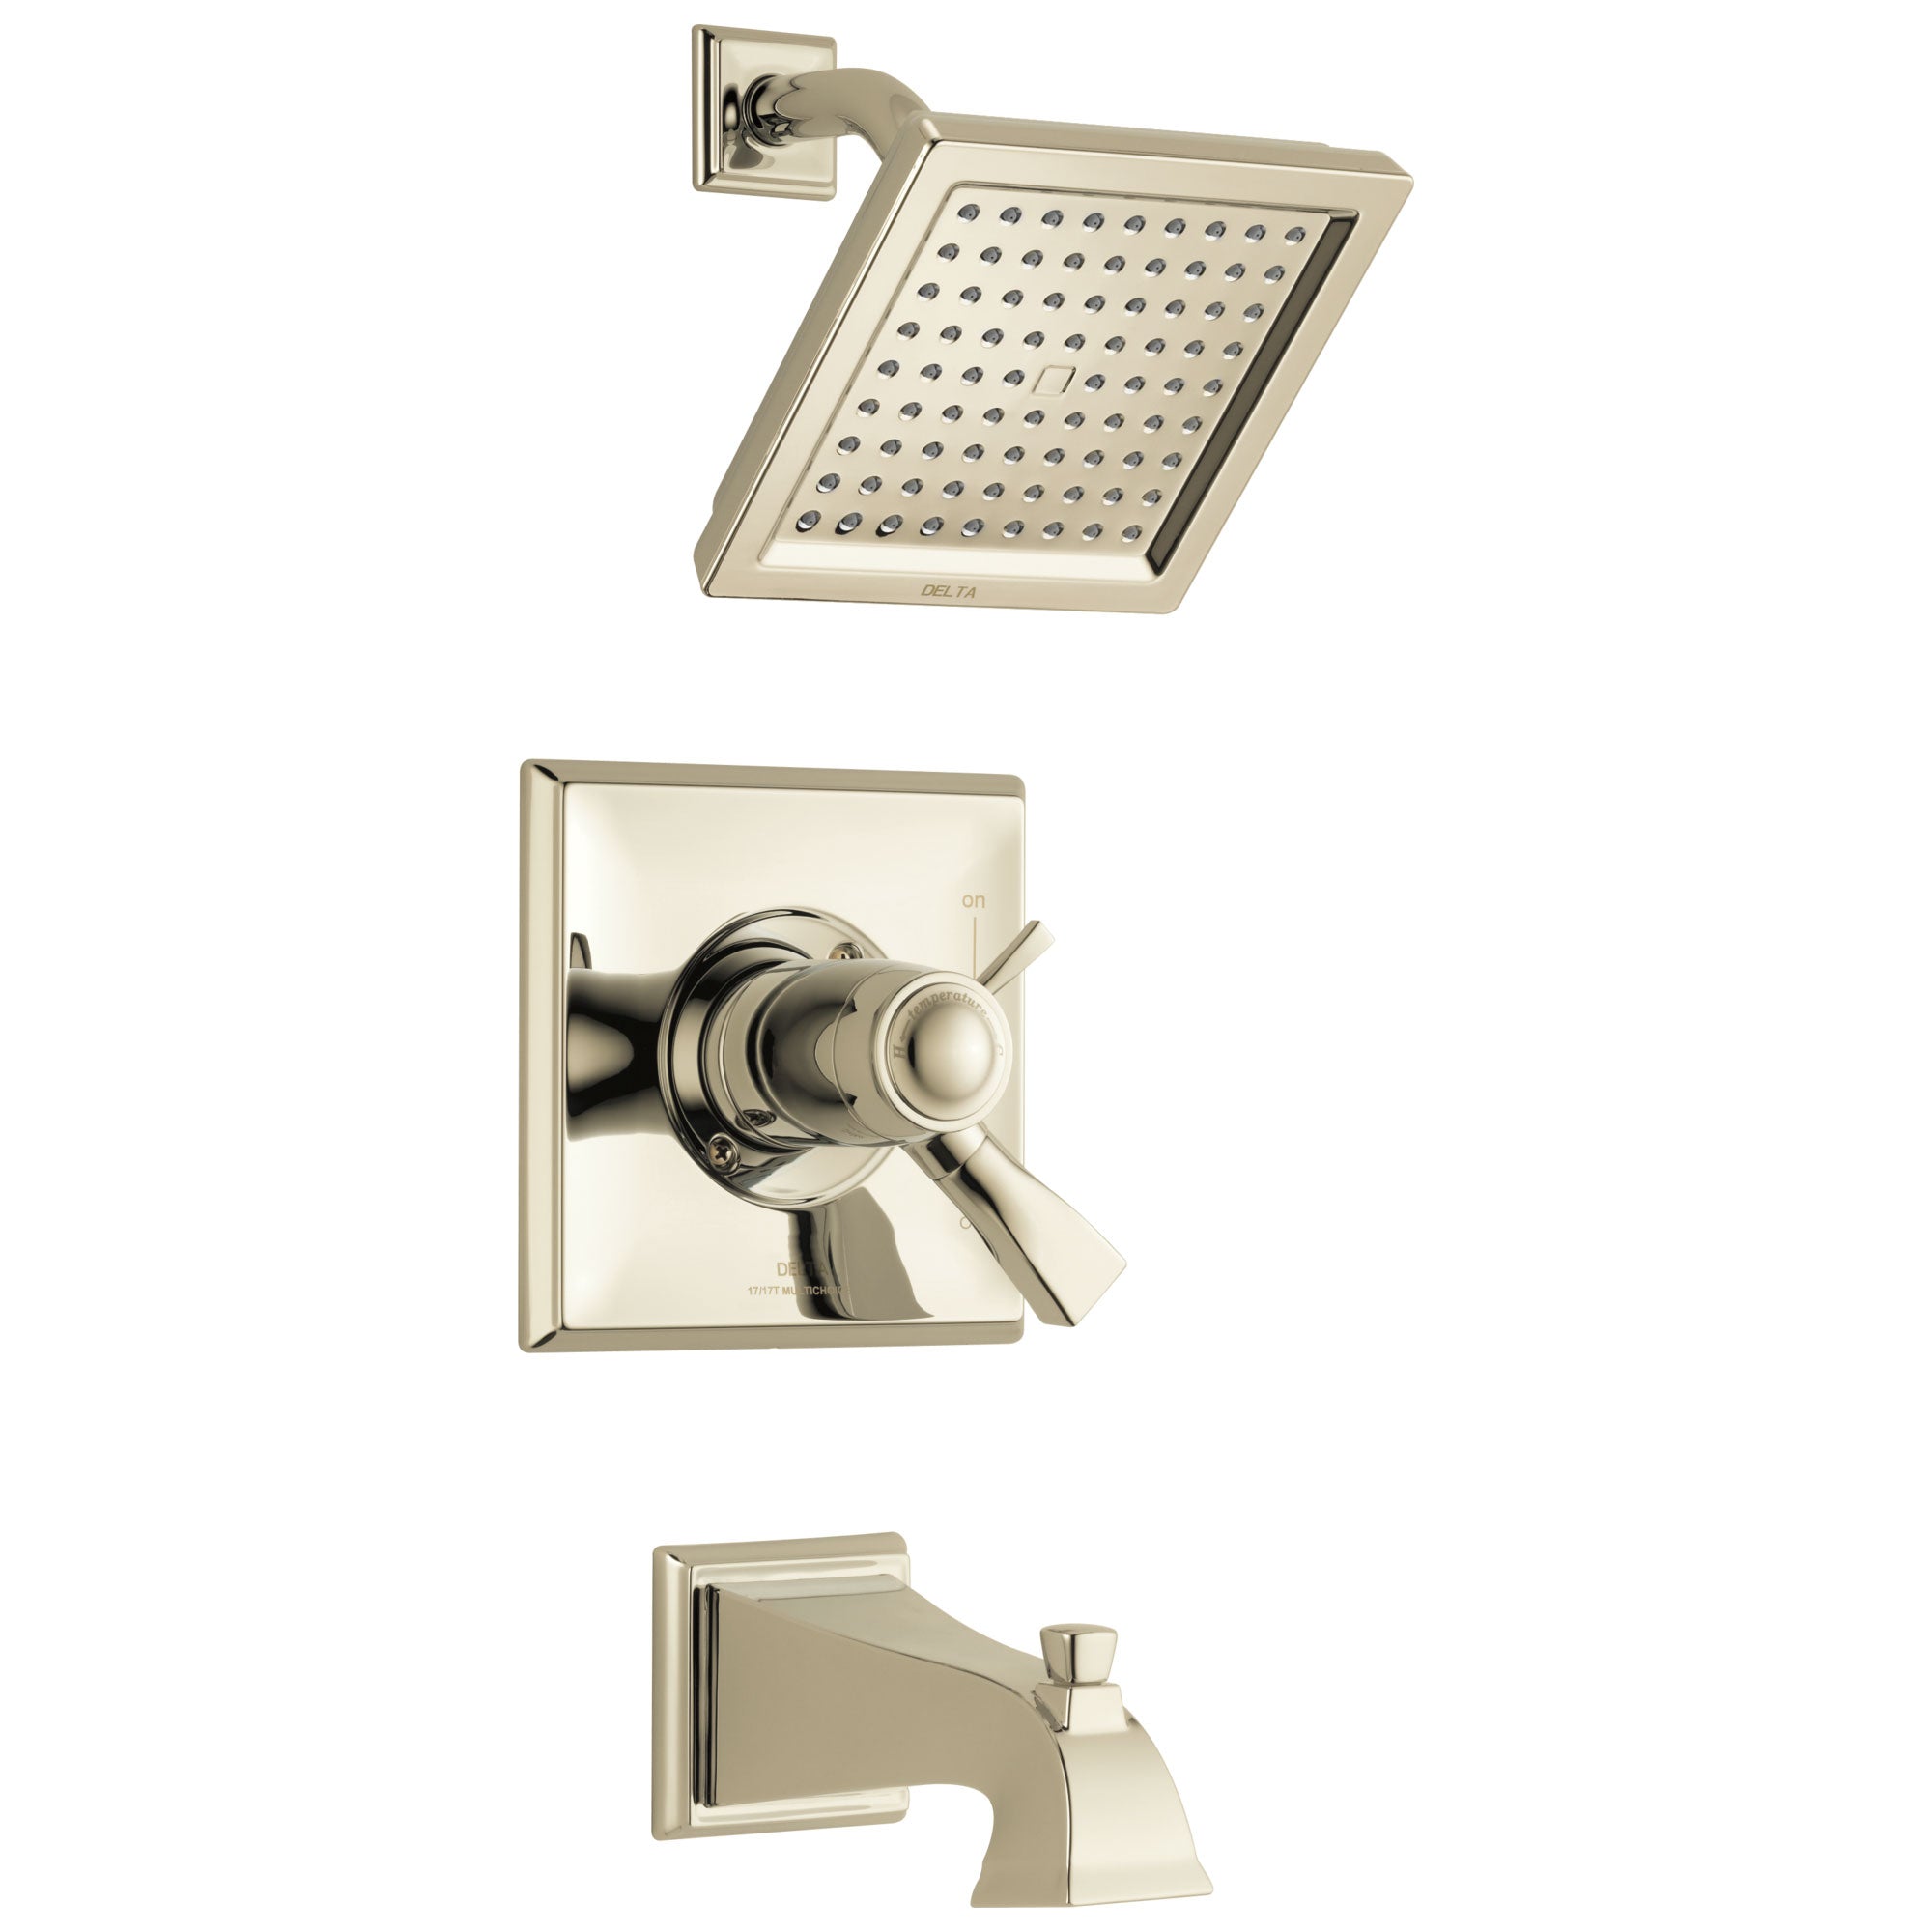 Delta Dryden Polished Nickel Finish Thermostatic Water Efficient Tub & Shower Faucet Combo Includes Handles, Cartridge, and Valve without Stops D3249V